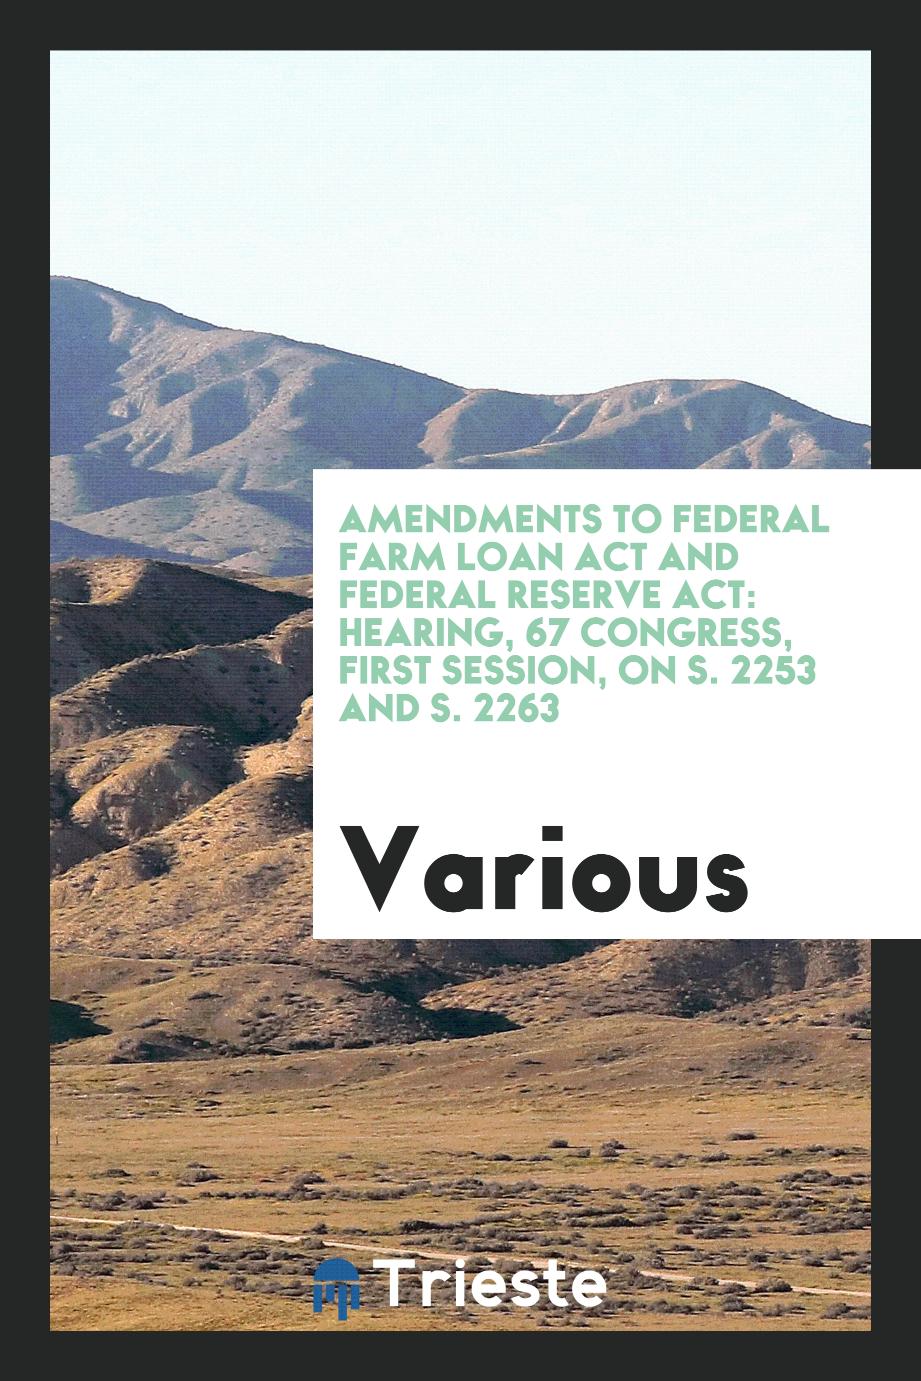 Amendments to Federal Farm Loan Act and Federal Reserve Act: Hearing, 67 congress, first session, on S. 2253 and S. 2263